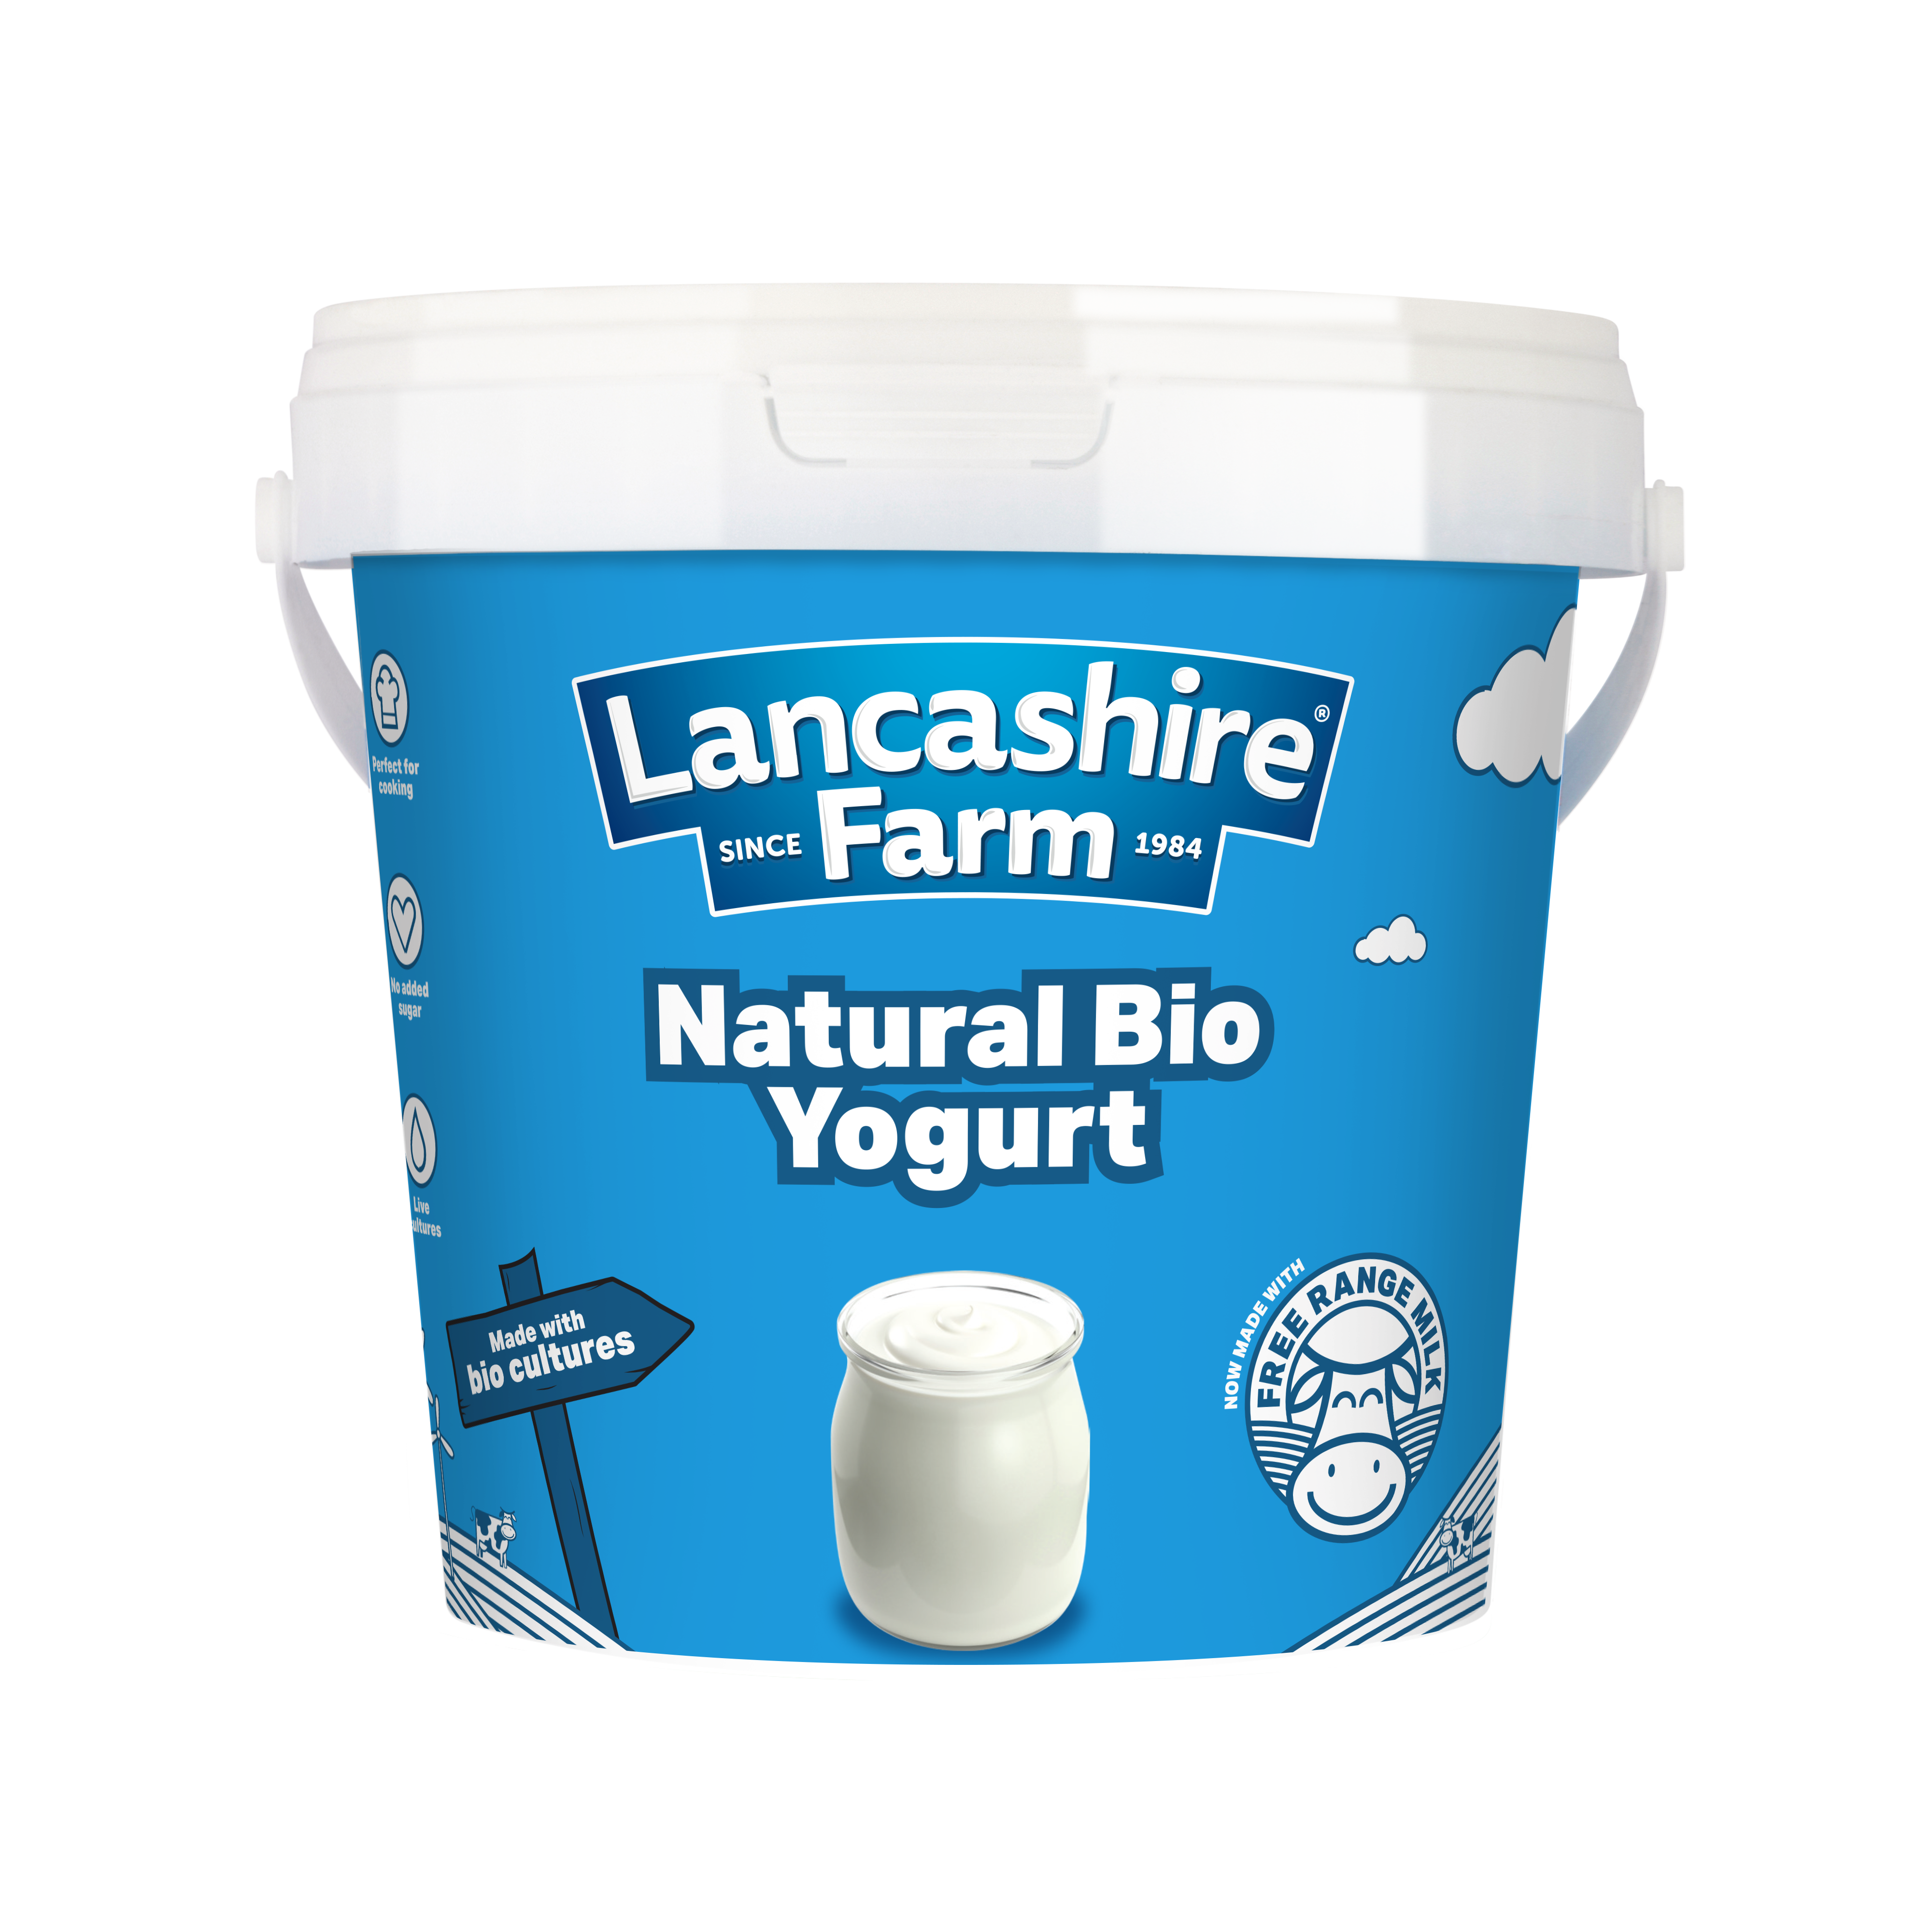 At the top of the page there is a floating one kilo Lancashire Farm Natural Bio pot with a halo above it.